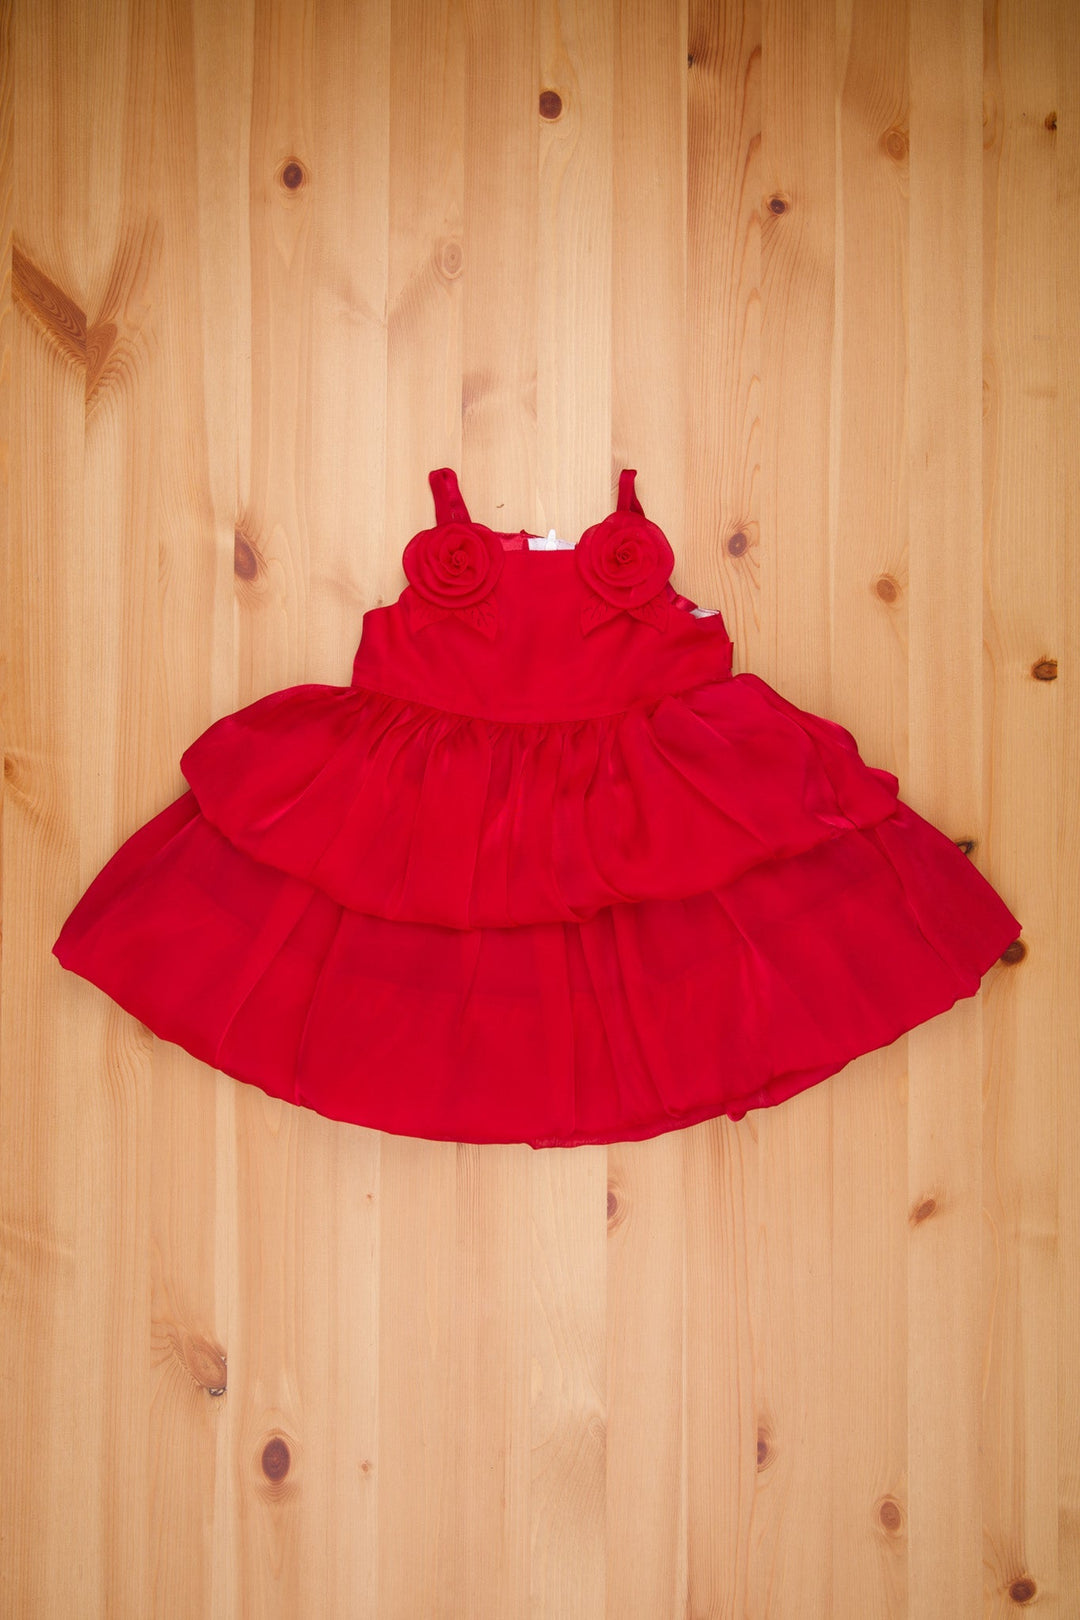 The Nesavu Girls Fancy Party Frock Deep Pink Drama Two-Layered Shimmer Baby Frock - Strap Shoulders with Rose Detailing - Newborn Elegance Nesavu 14 (6M) / Pink / Organza Tissue PF131D-14 Birthday Frock 2yrs Old Girl | Designer Wear Frock For Birthday | The Nesavu